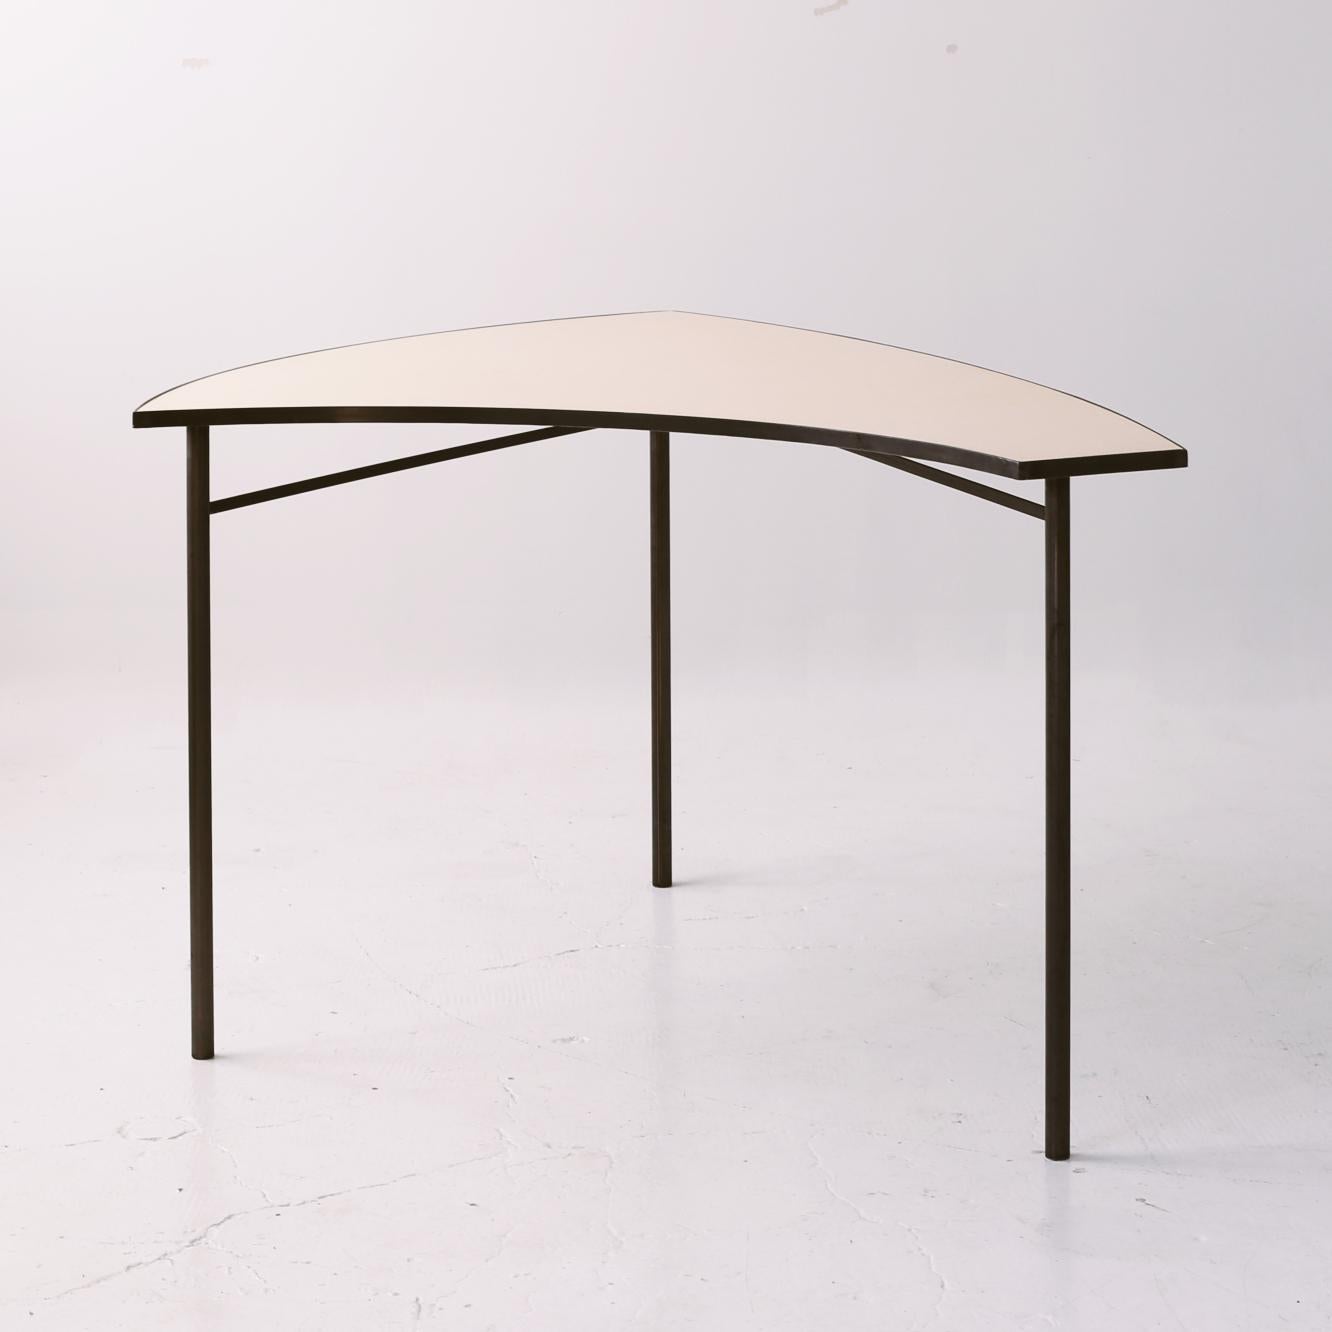 Piece C TABULA [non] RASA Table by Studio Traccia
Dimensions: W 140 x D 84 x H 74 cm
Materials: Steel.
Different combinations are available.

The table was designed for our installation called tabula[non]rasa developed for Milan Design Week